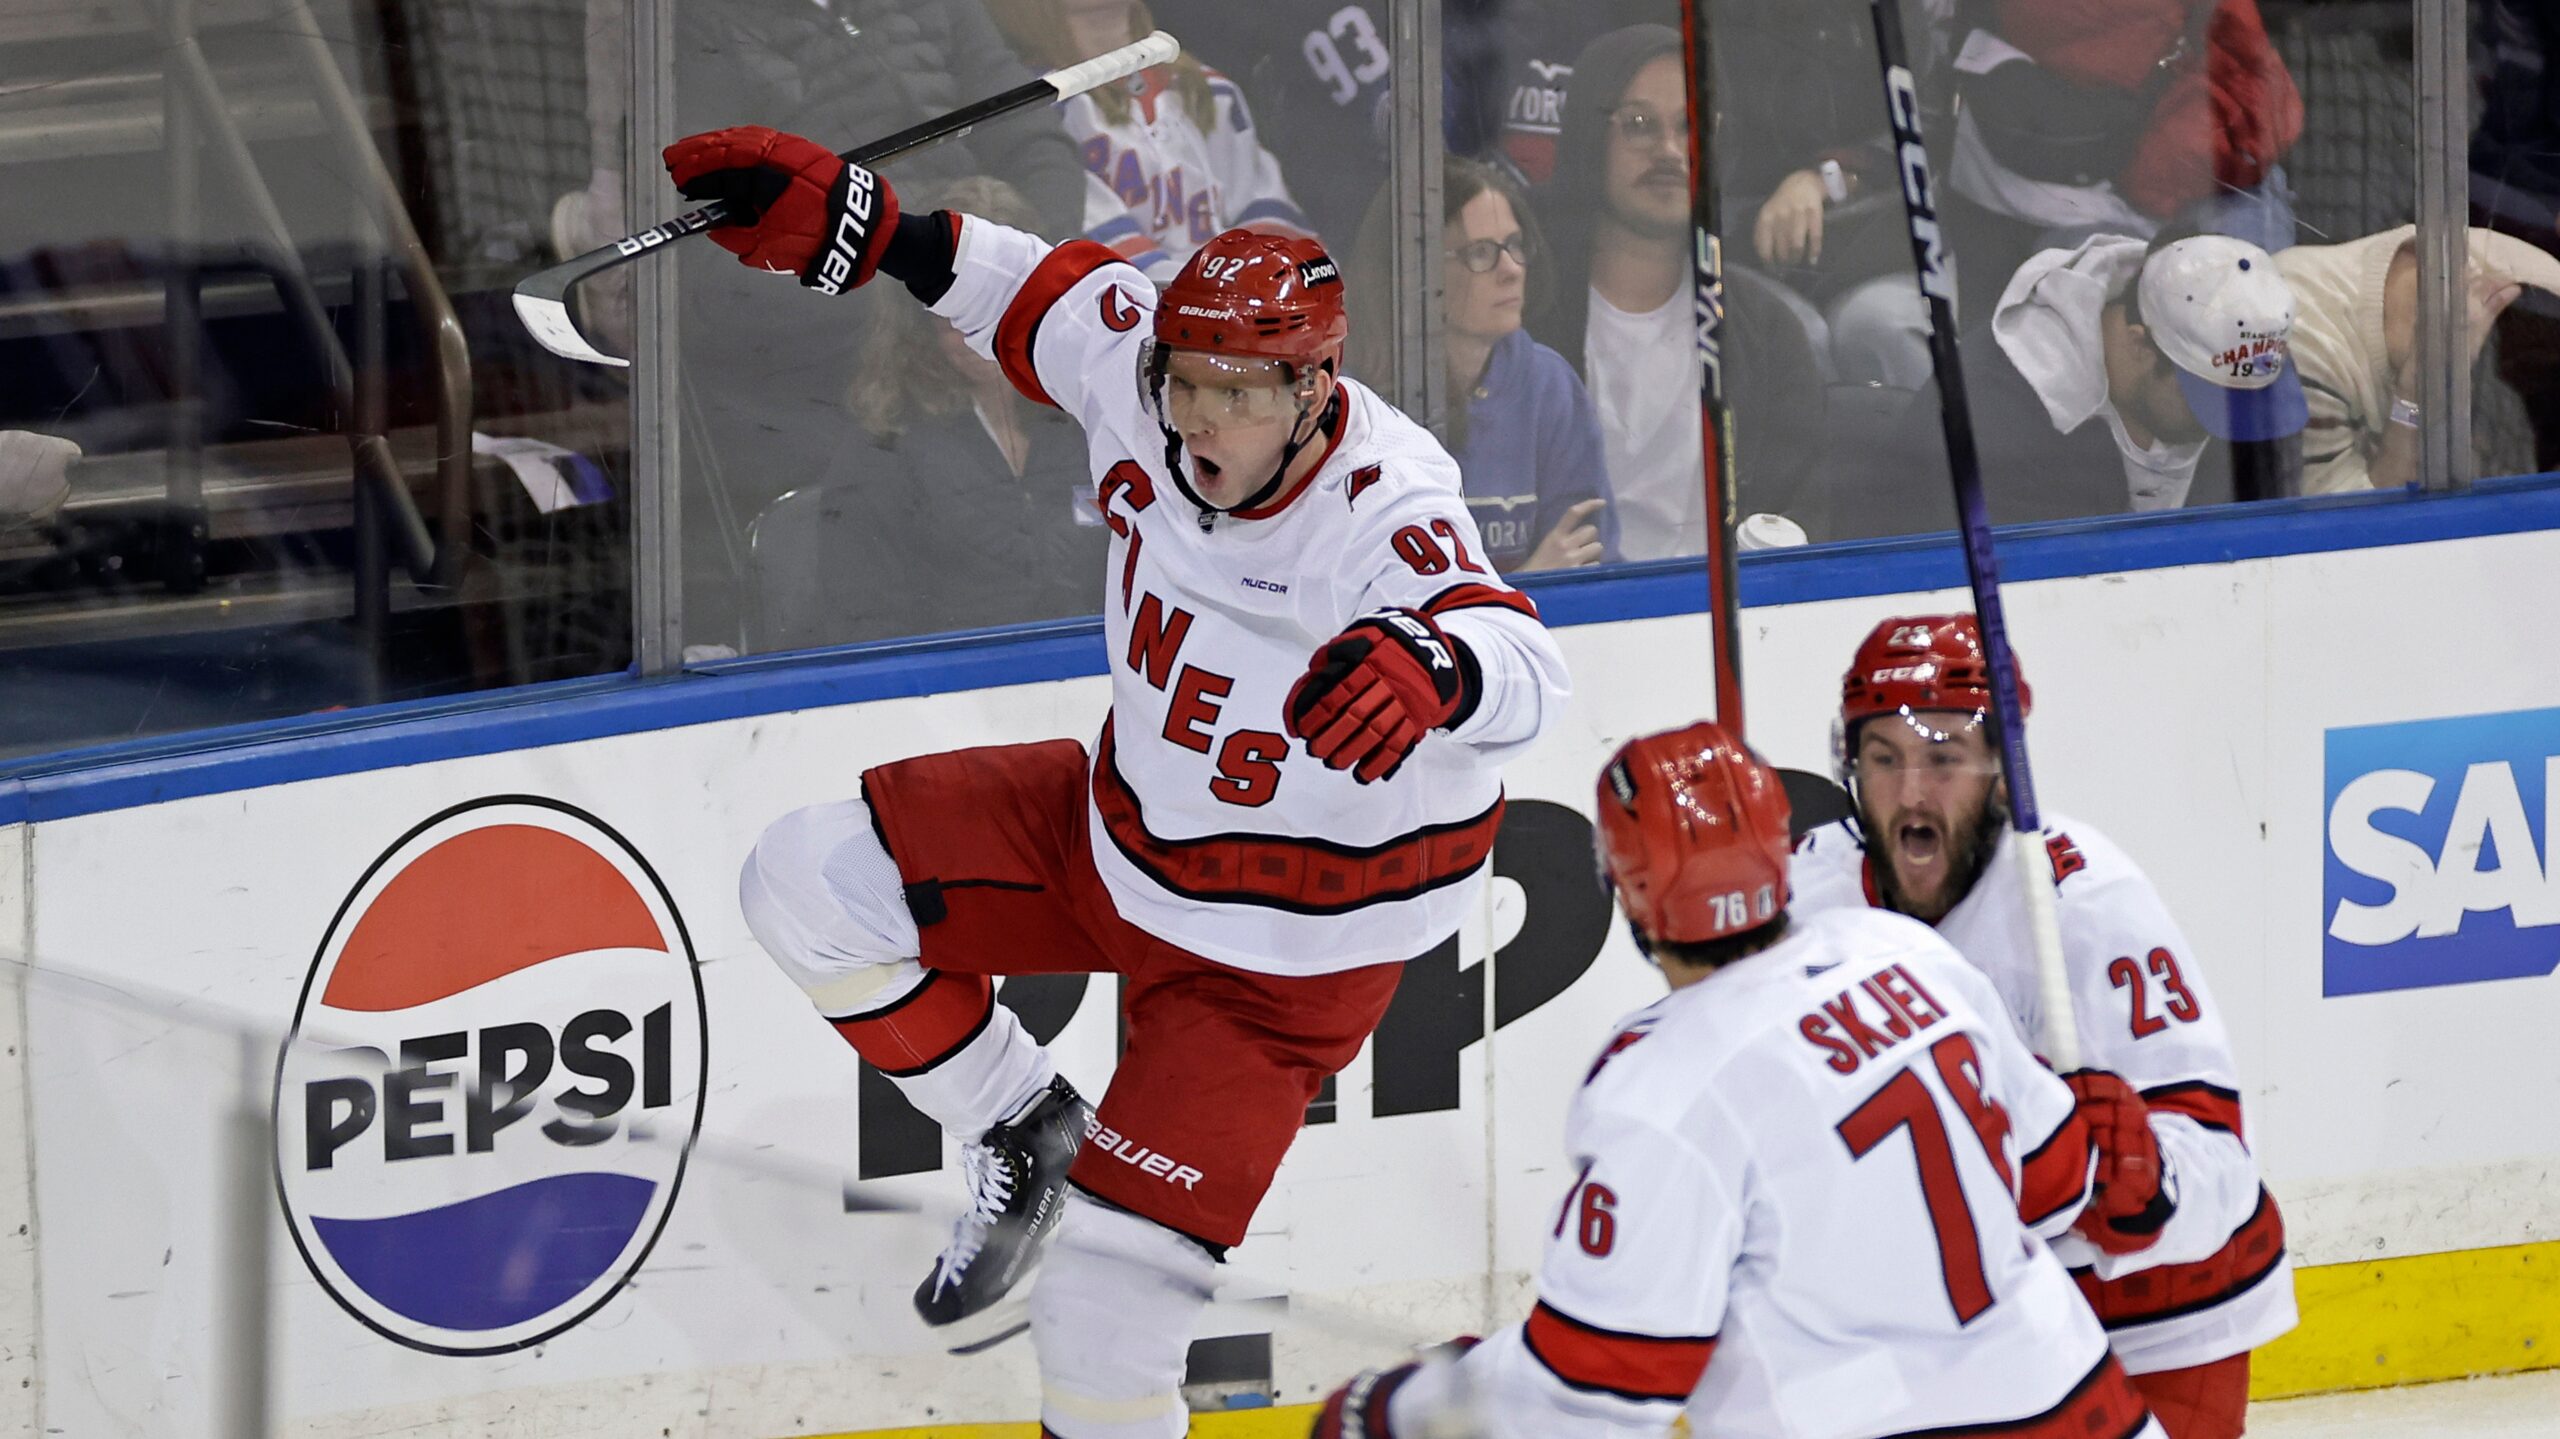 Carolina Hurricanes rally to beat New York Rangers in Game 5 to avoid elimination